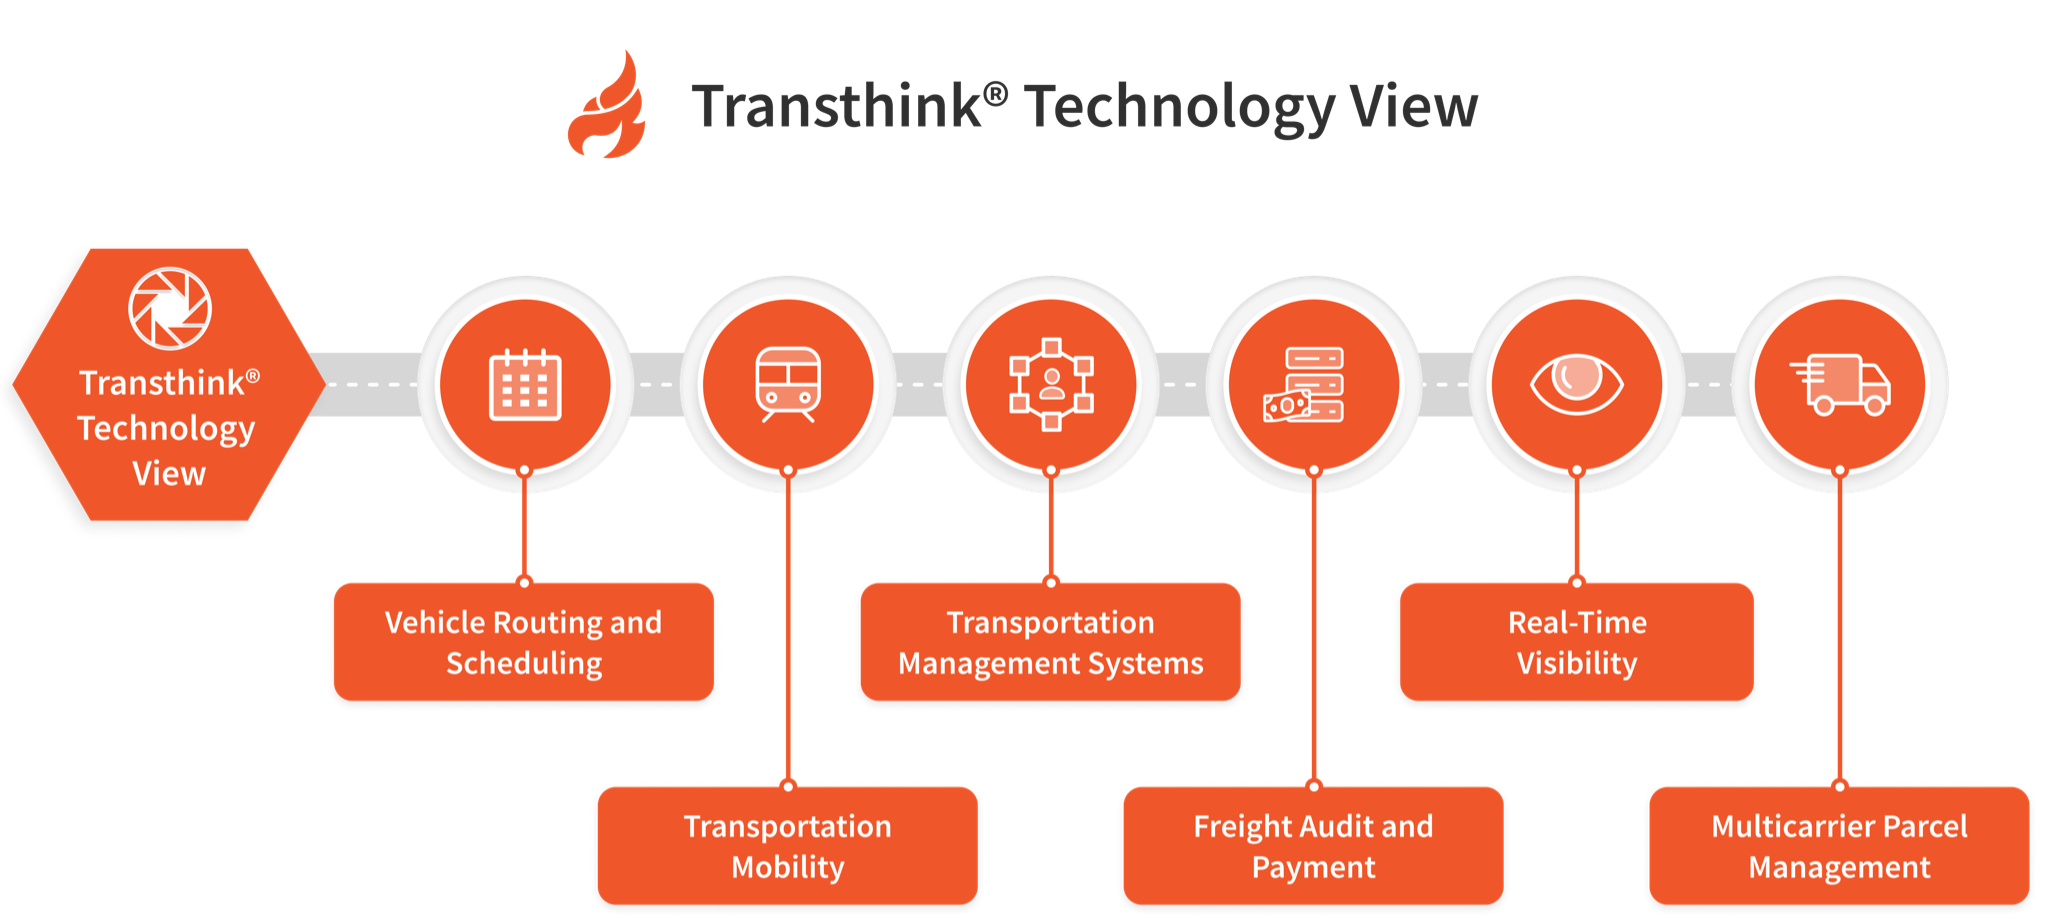 Transthink Technology View